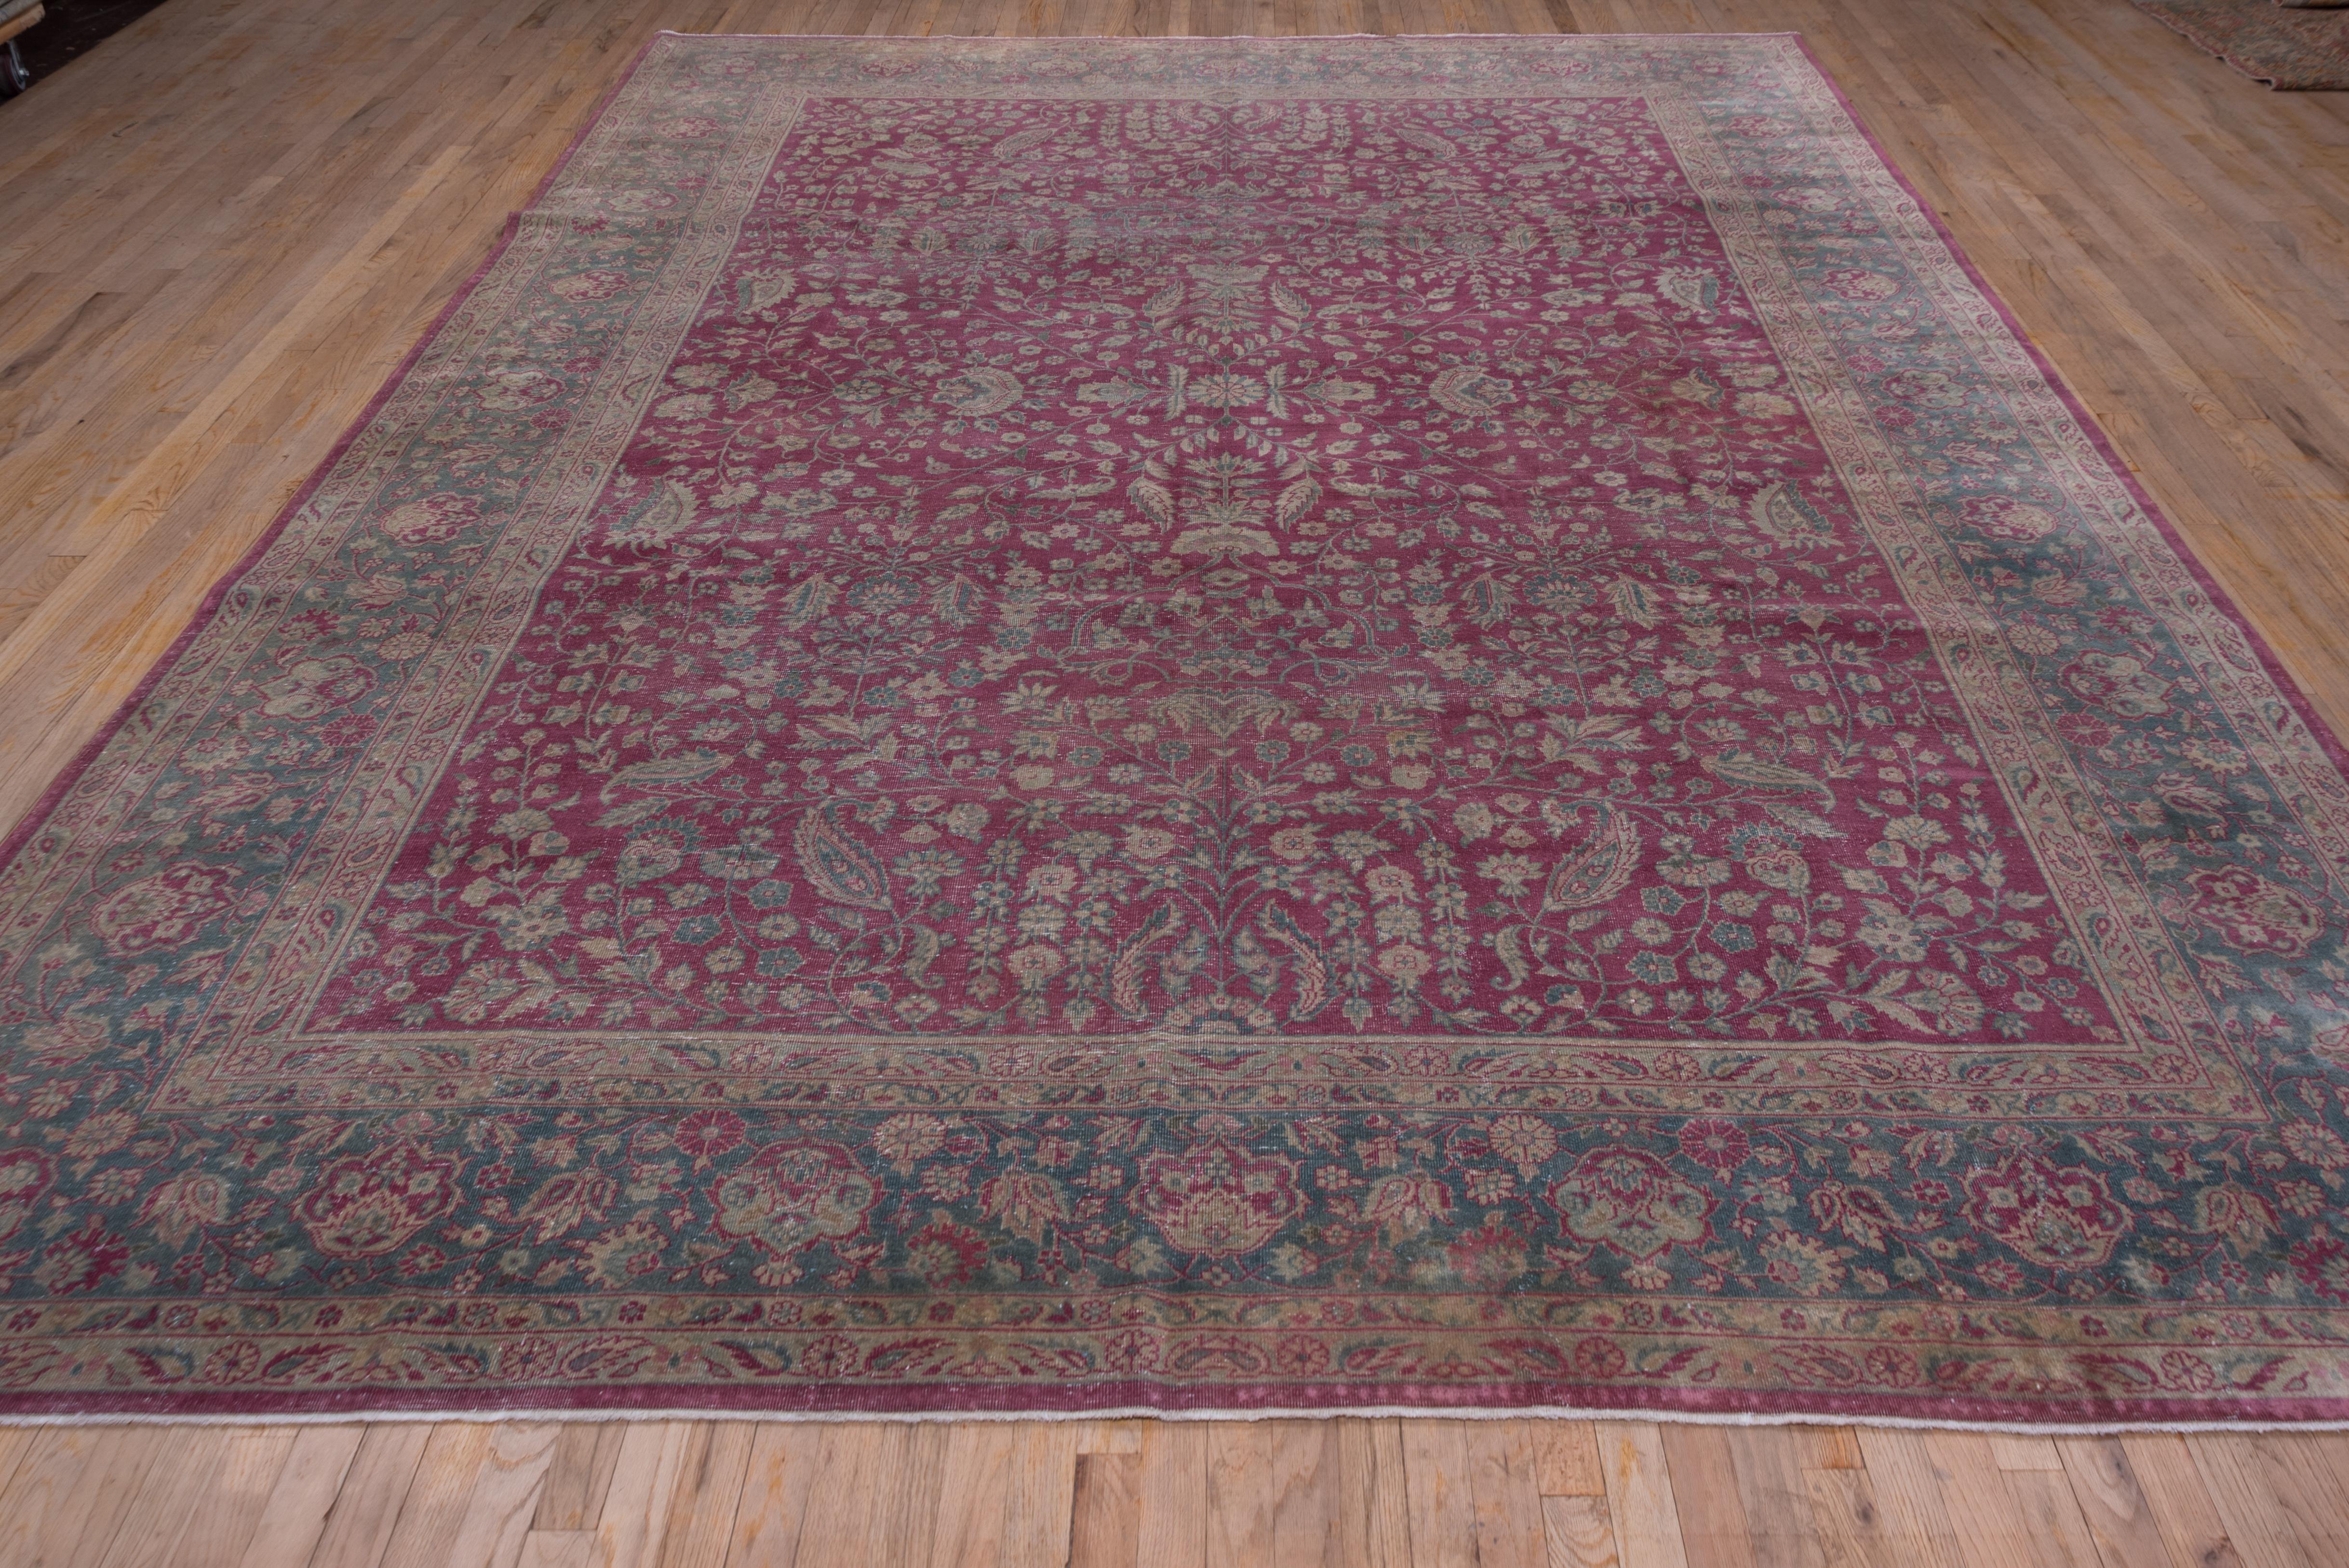 Mid-20th Century Antique Turkish Sivas Rug, Raspberry Red Field, Teal Borders, Circa 1930s For Sale